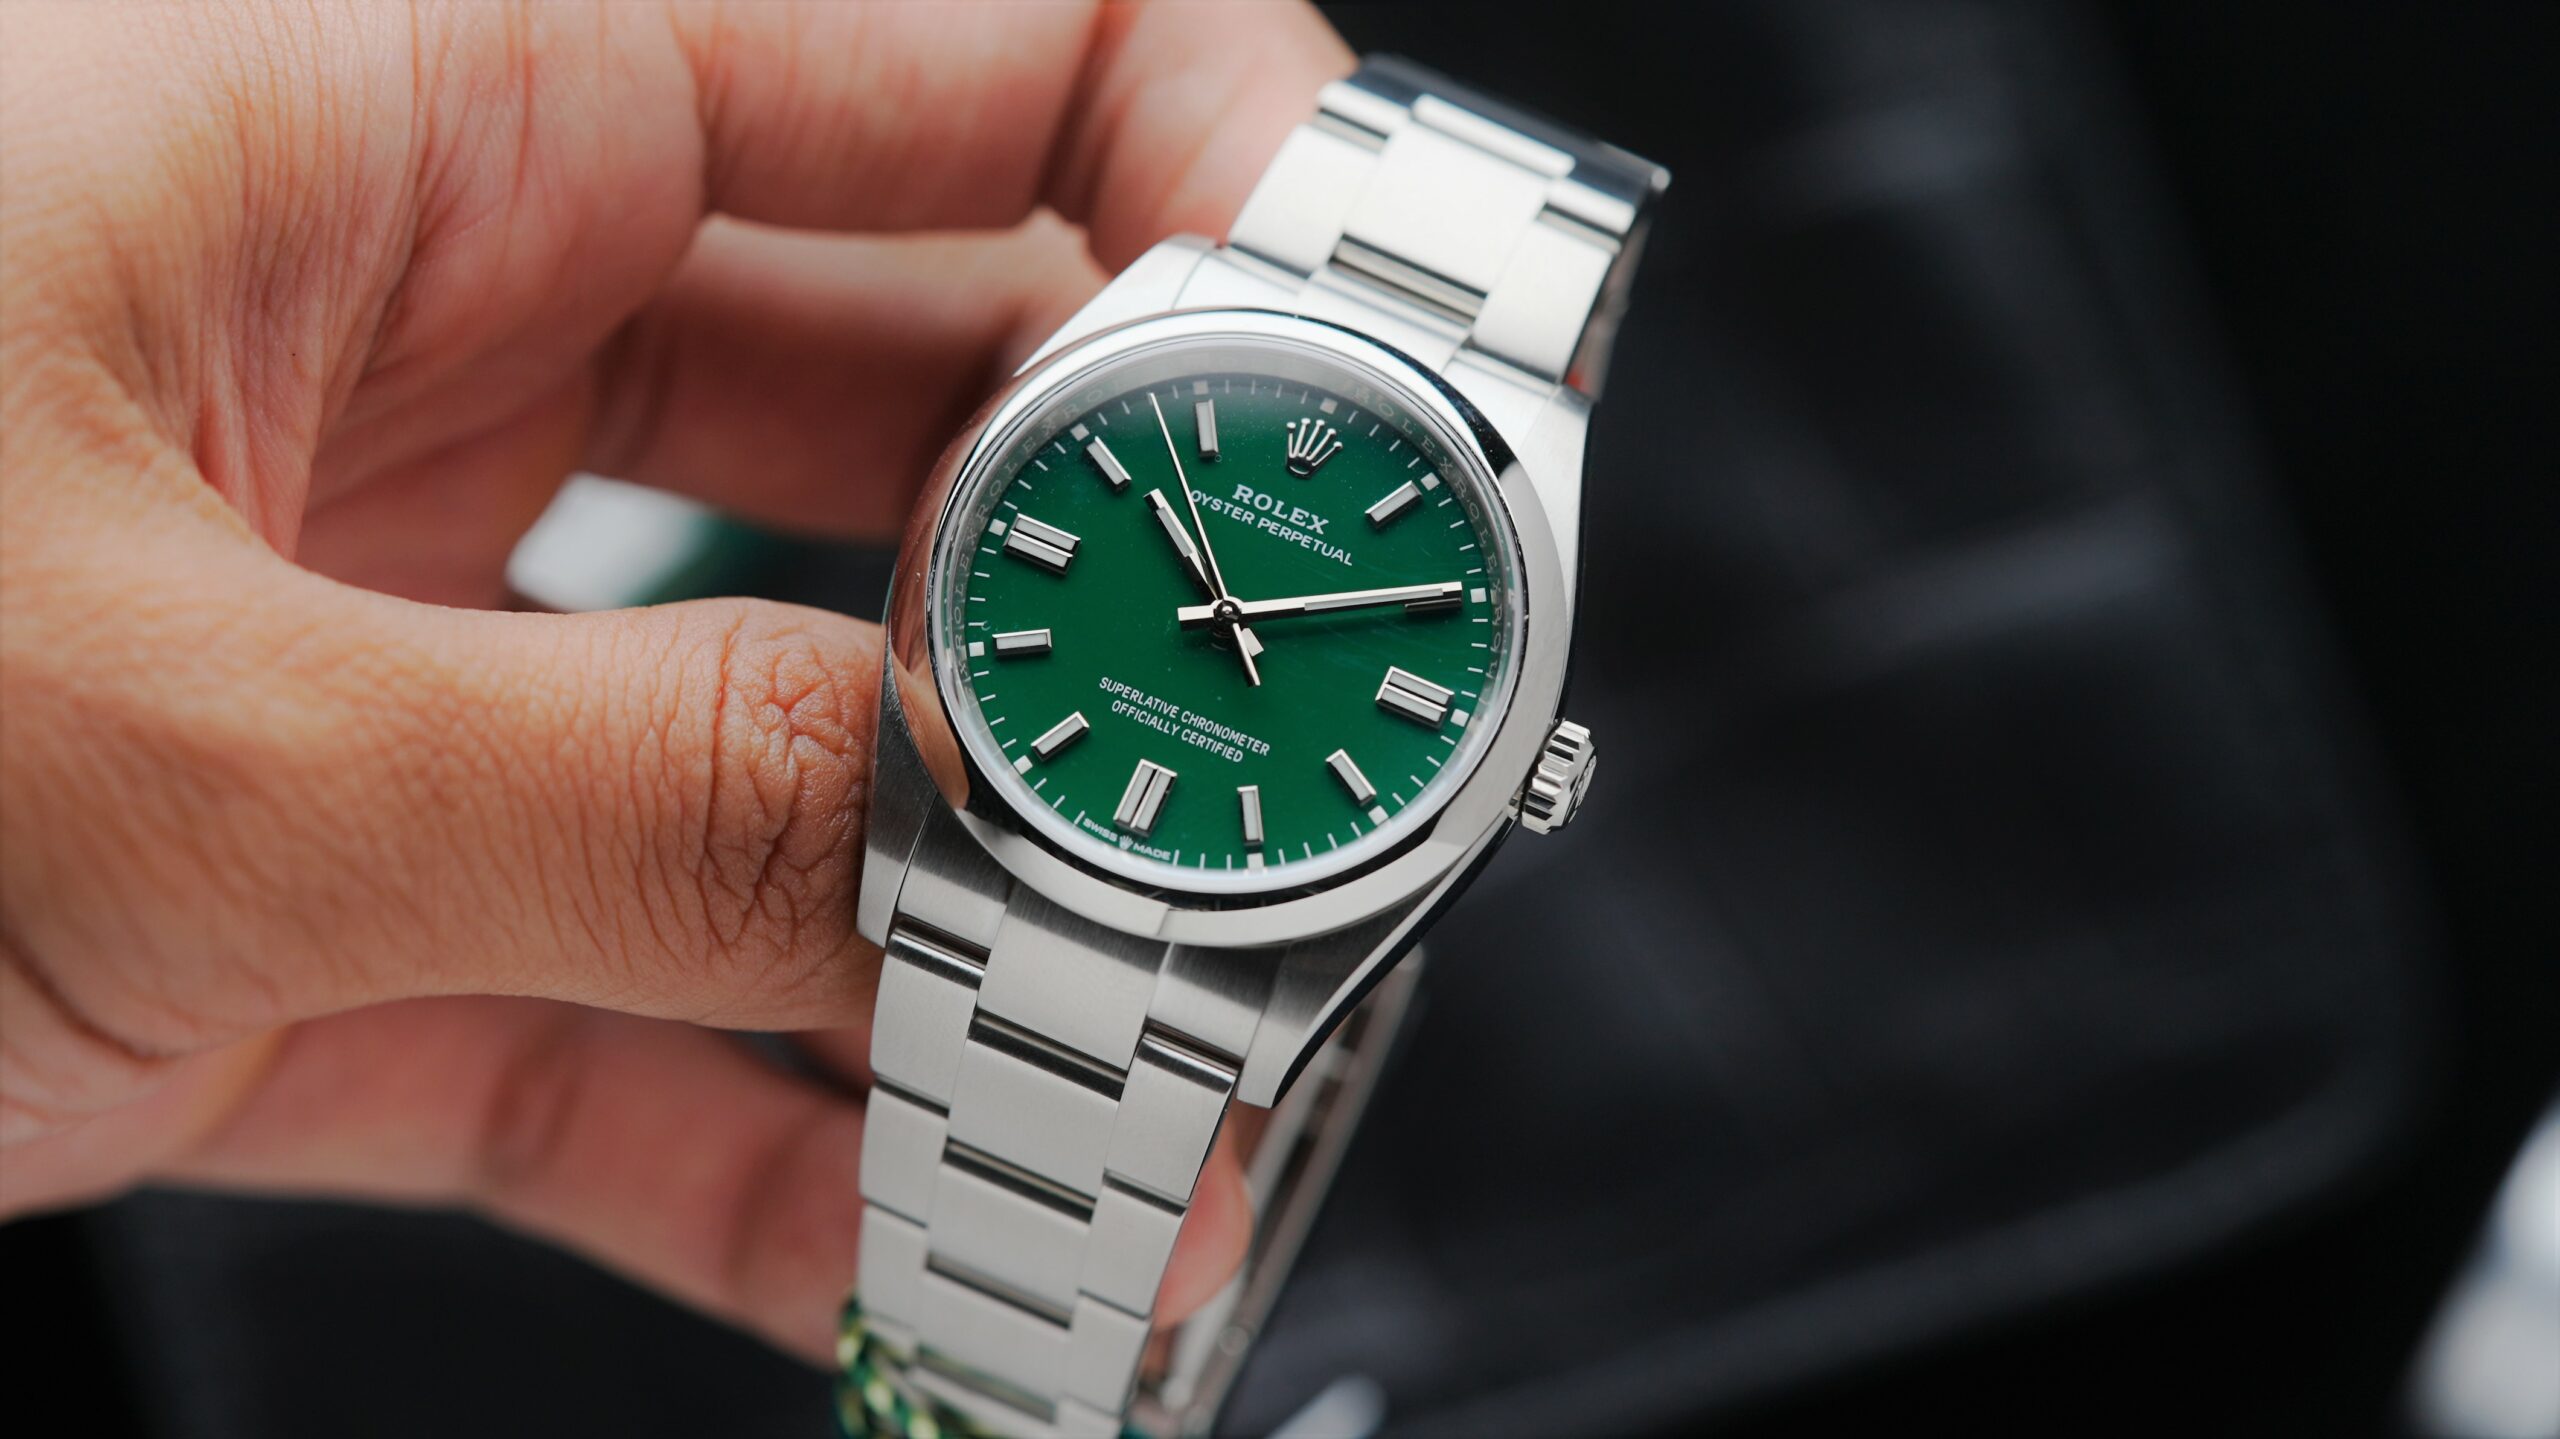 Rolex Oyster Perpetual 36 Green 2022 watch being held in hand.